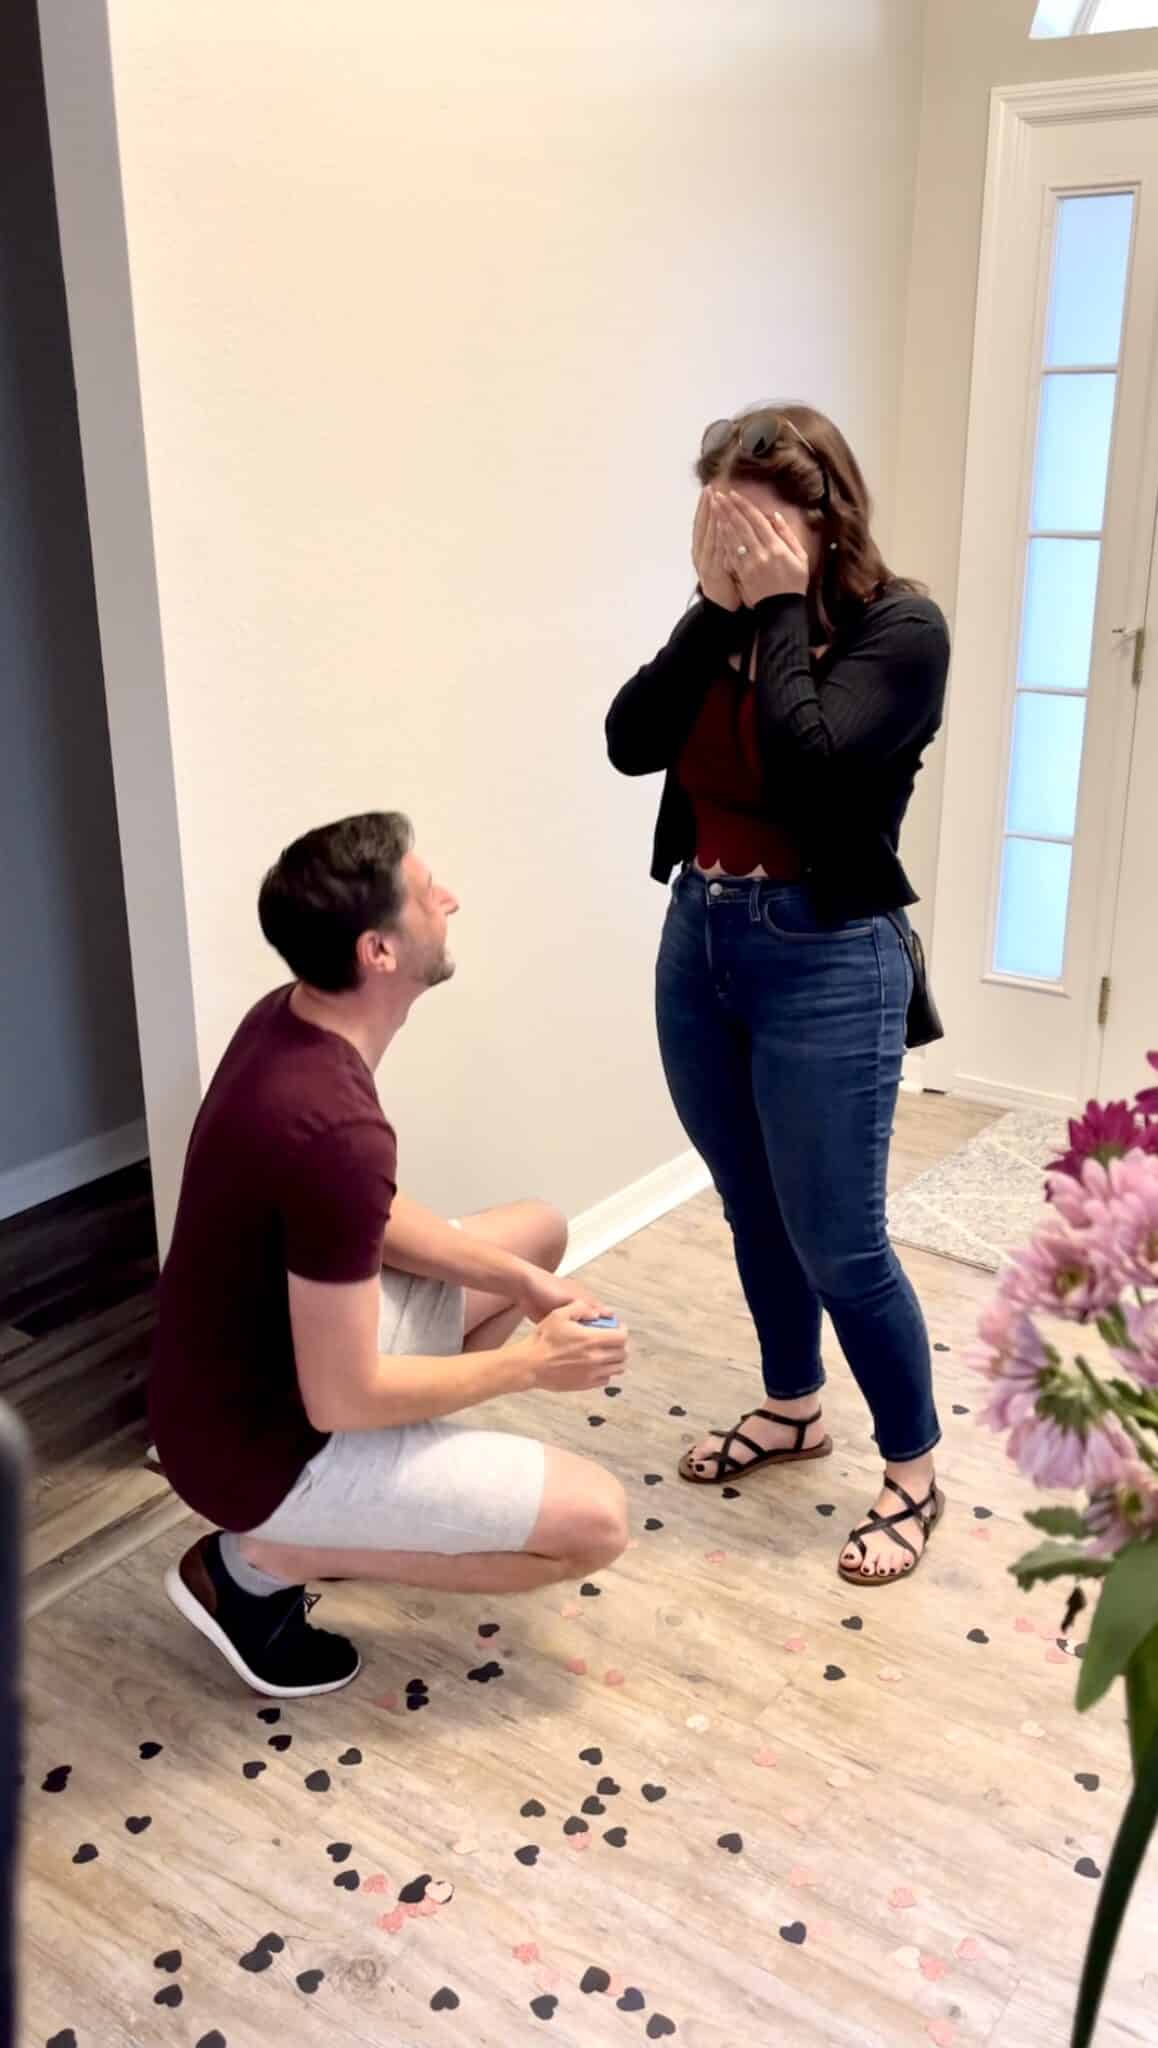 future bride covering her mouth in shock and future groom one one knee proposing during their central florida at home marriage proposal